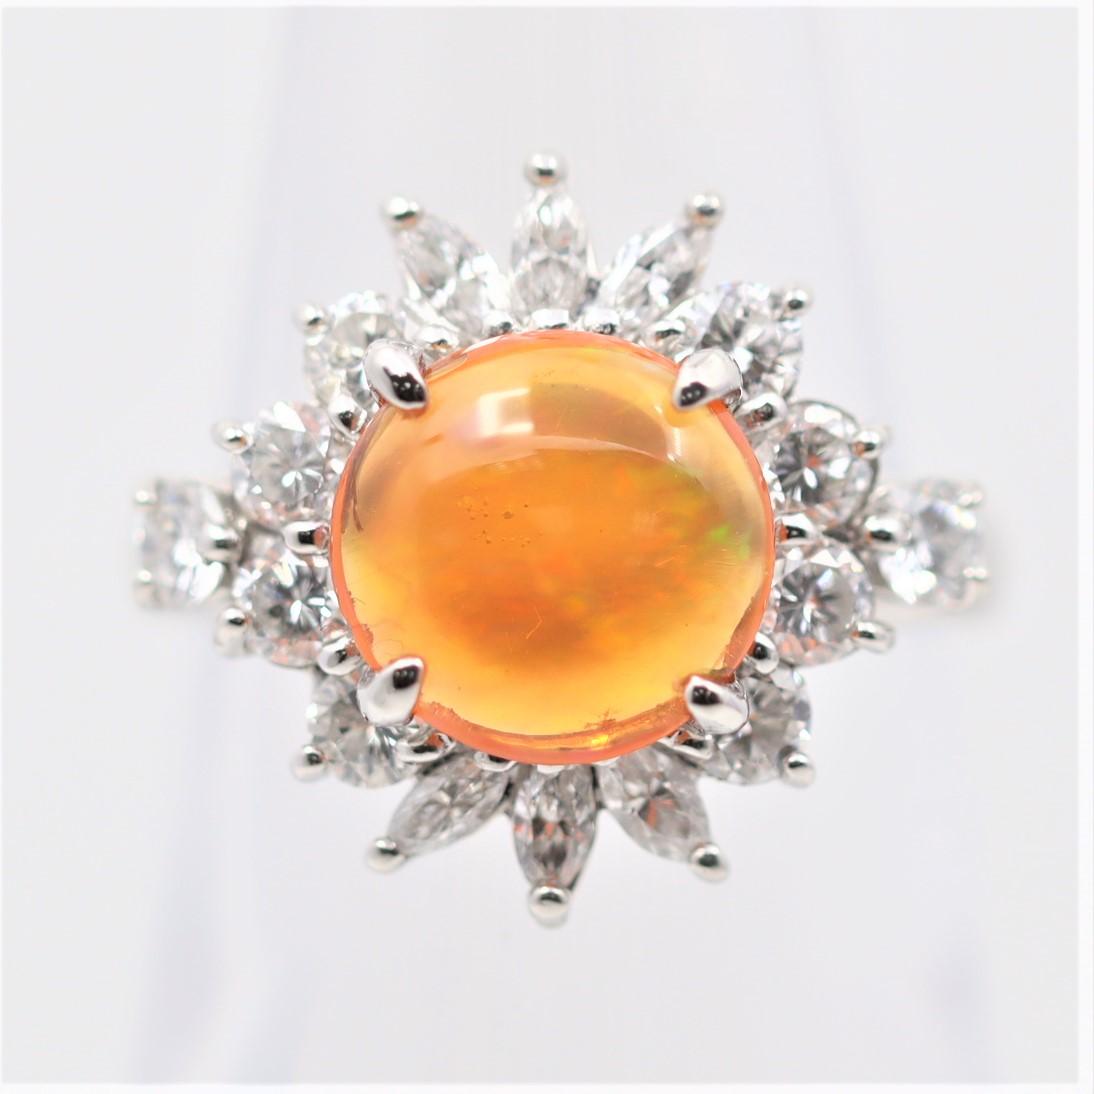 A sweet and stylish ring featuring a 1.60 carat fire opal with great play-of-color as flashes of greens, oranges, and reds can be seen running across the stone. It is accented by 1.20 carats of diamonds set around the opal in a spray design.